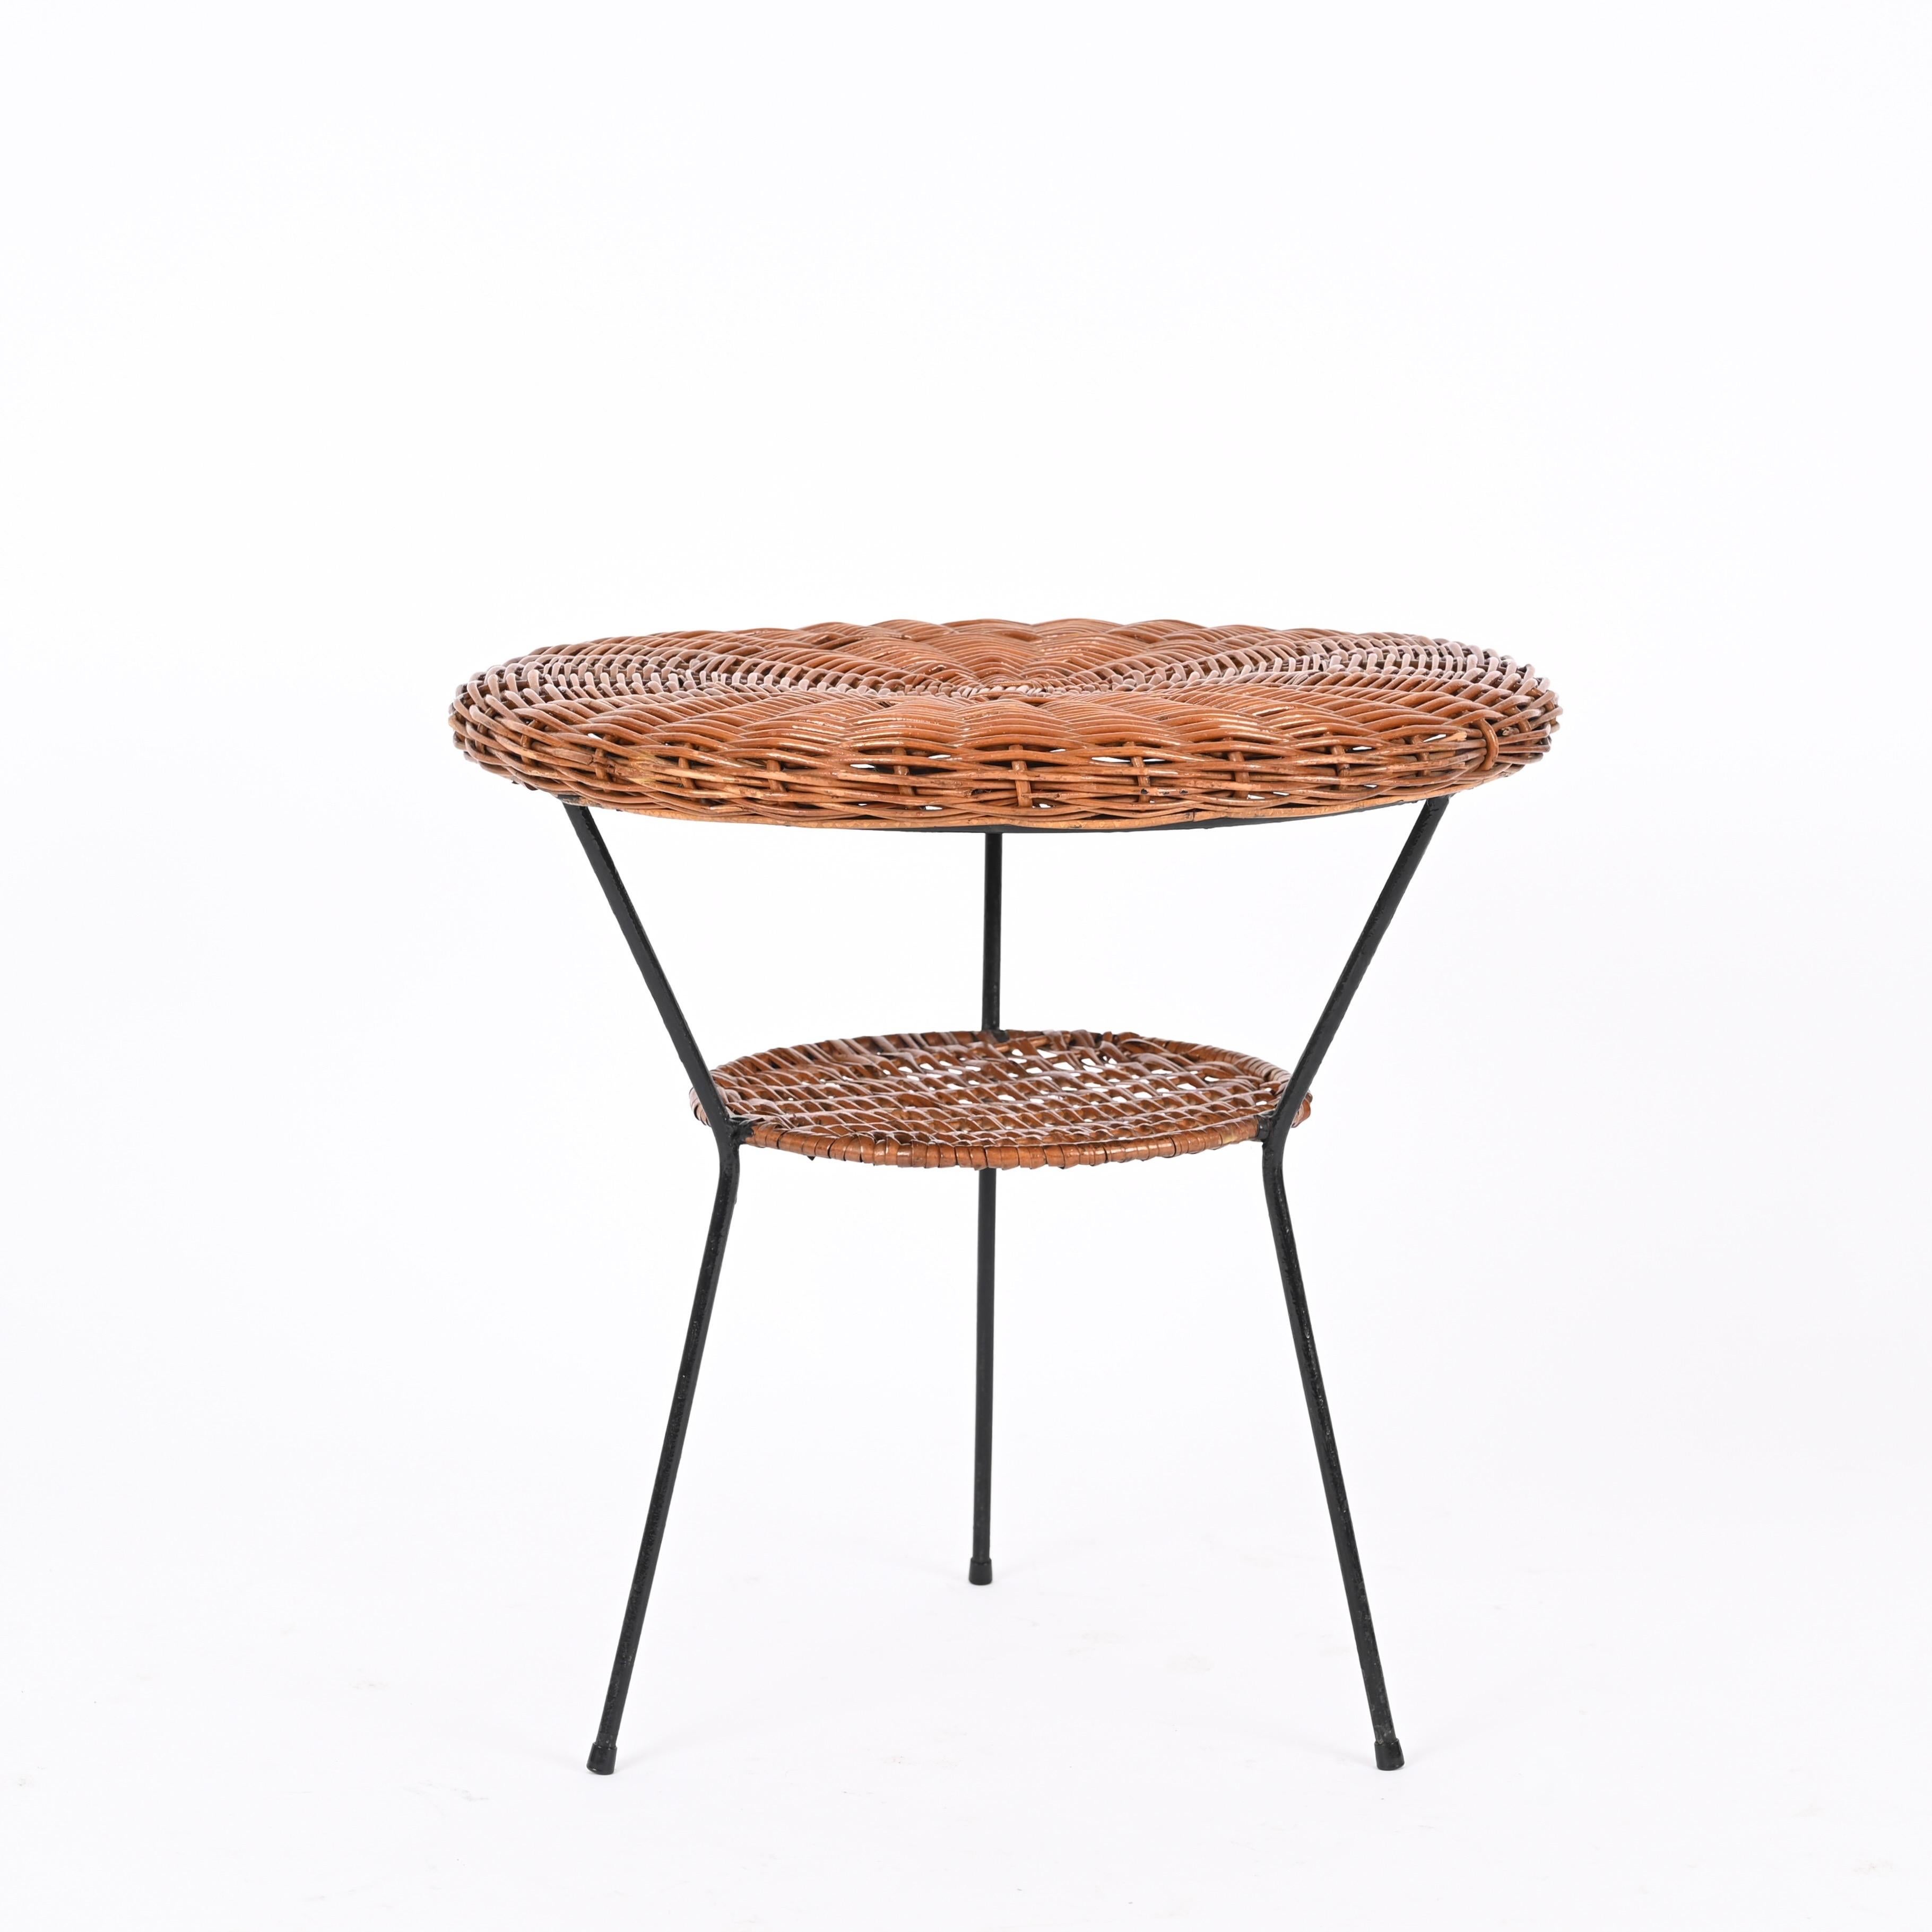 Mid-Century Modern Woven Rattan, Wicker and Iron Two-Tier Round Coffee Table, Matégot, France 1960s For Sale